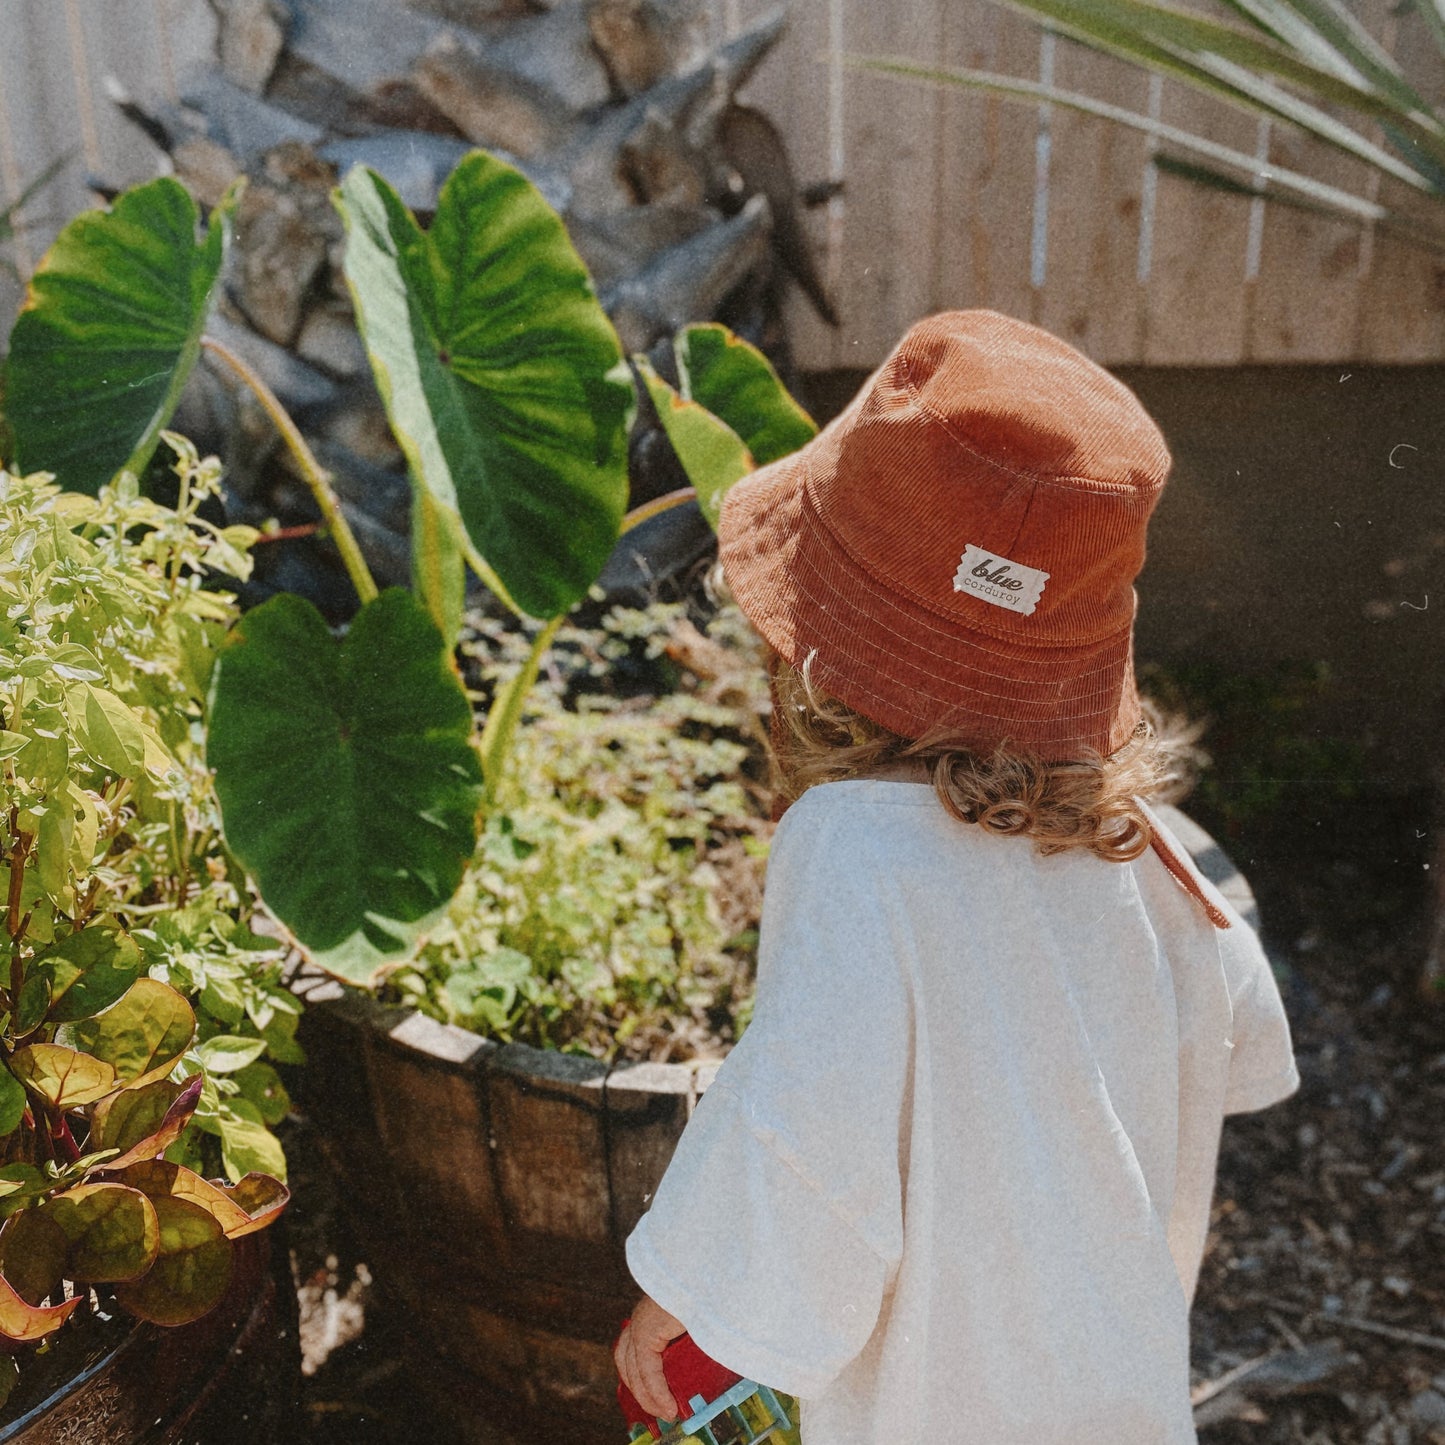 Matching Mommy and Baby Corduroy Bucket Hat Set - Rust